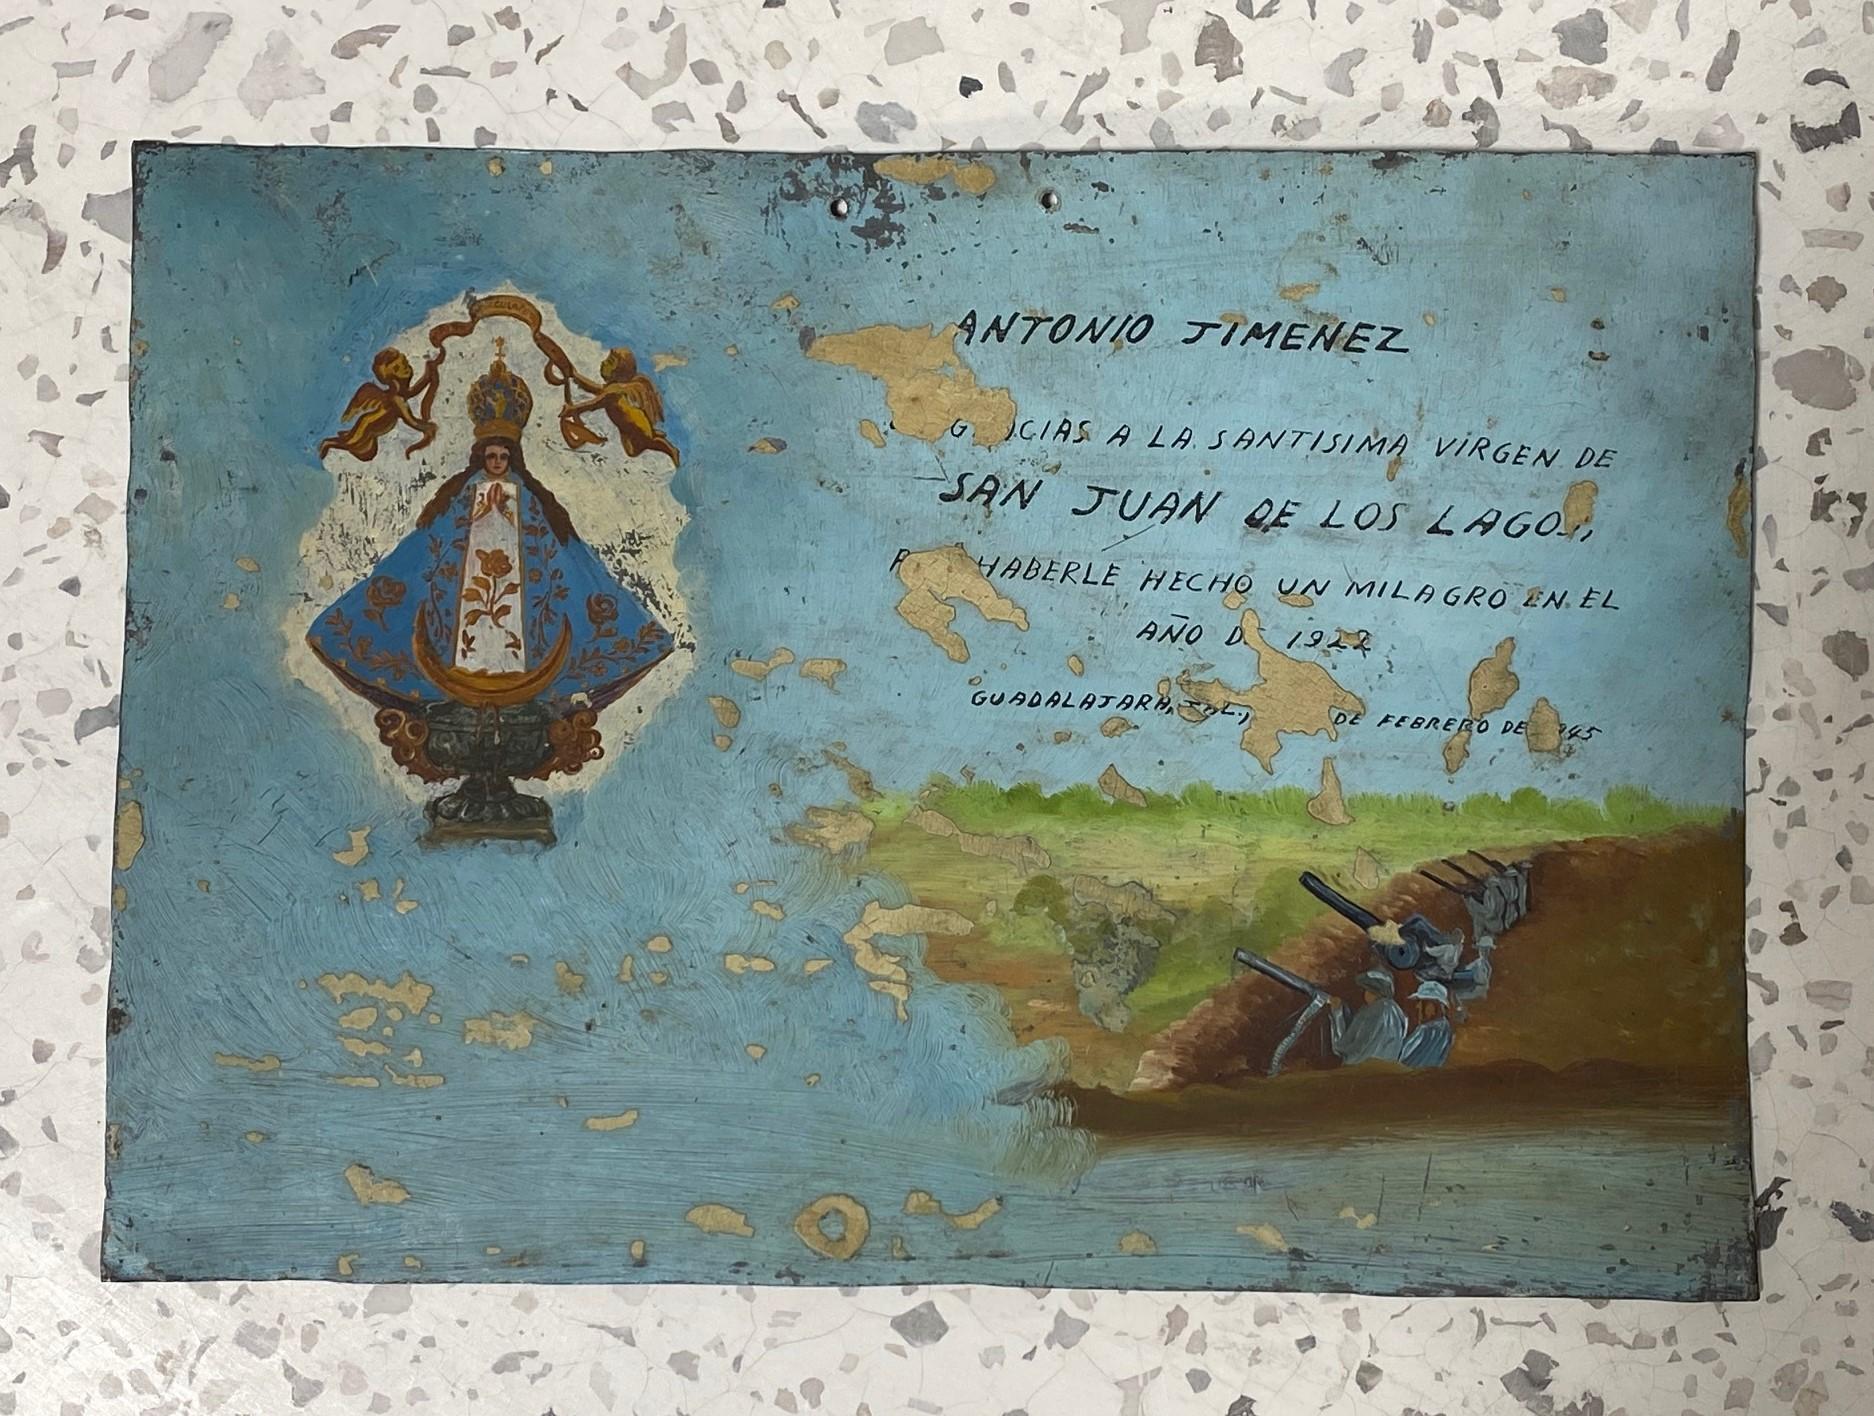 A beautiful early to mid-20th century Colonial Mexican Folk Art ex-voto retablo lámina painting featuring the Virgin of Guadalupe.

The work is hand painted on metal (likely tin). Ex-votos and retablos are often placed above the altars in churches